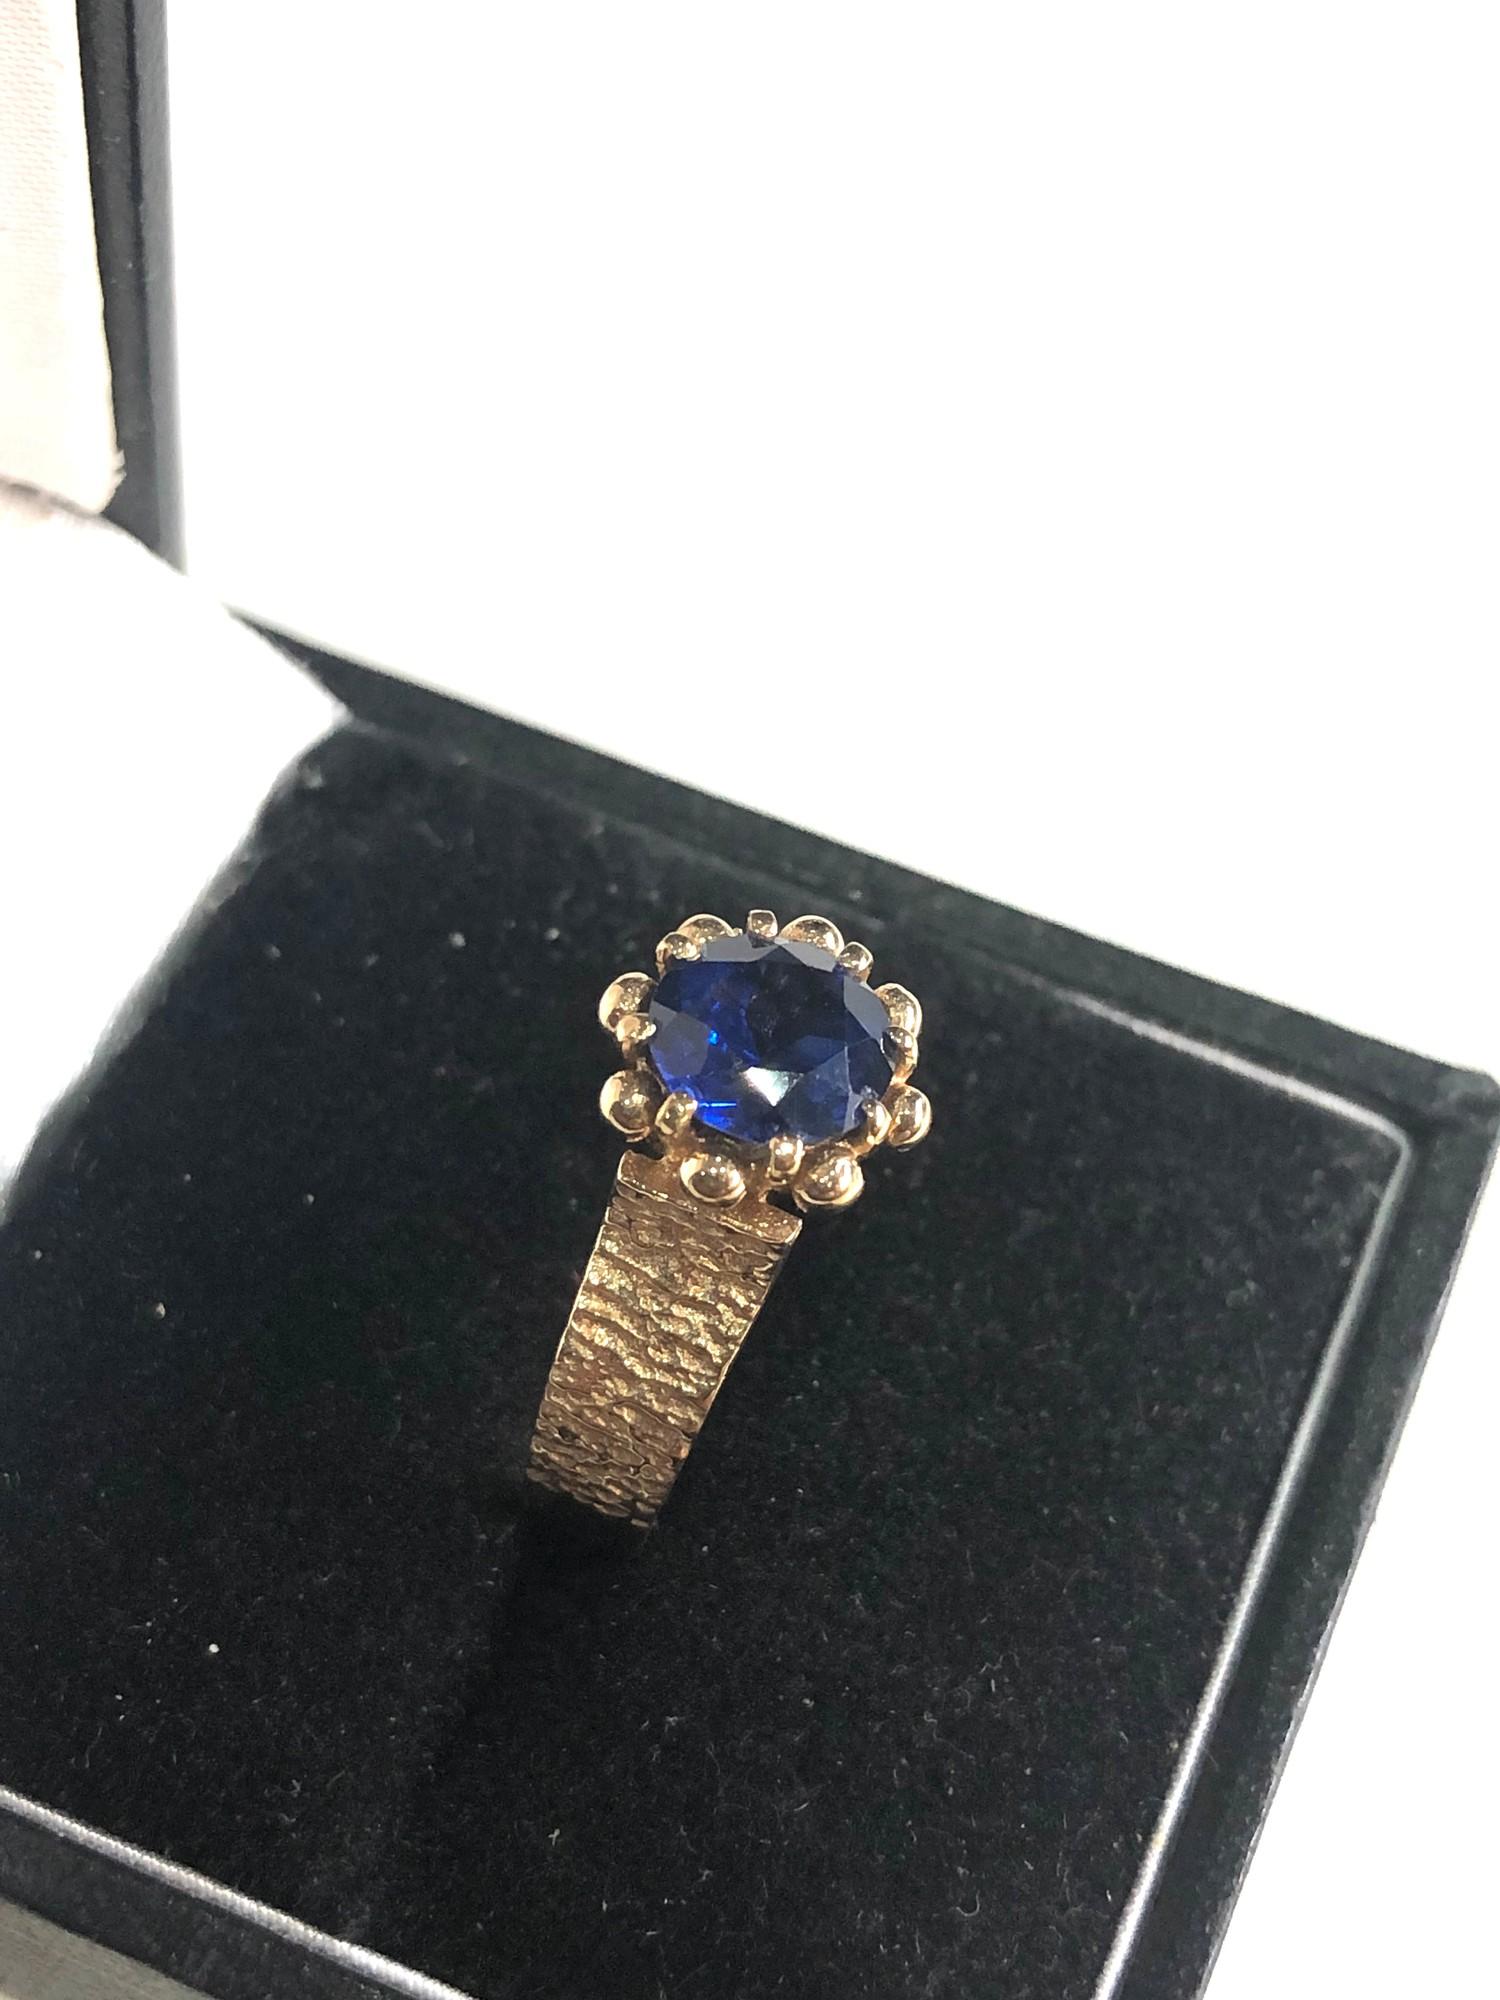 9ct gold synthetic sapphire set ring weight 3.9g - Image 2 of 4